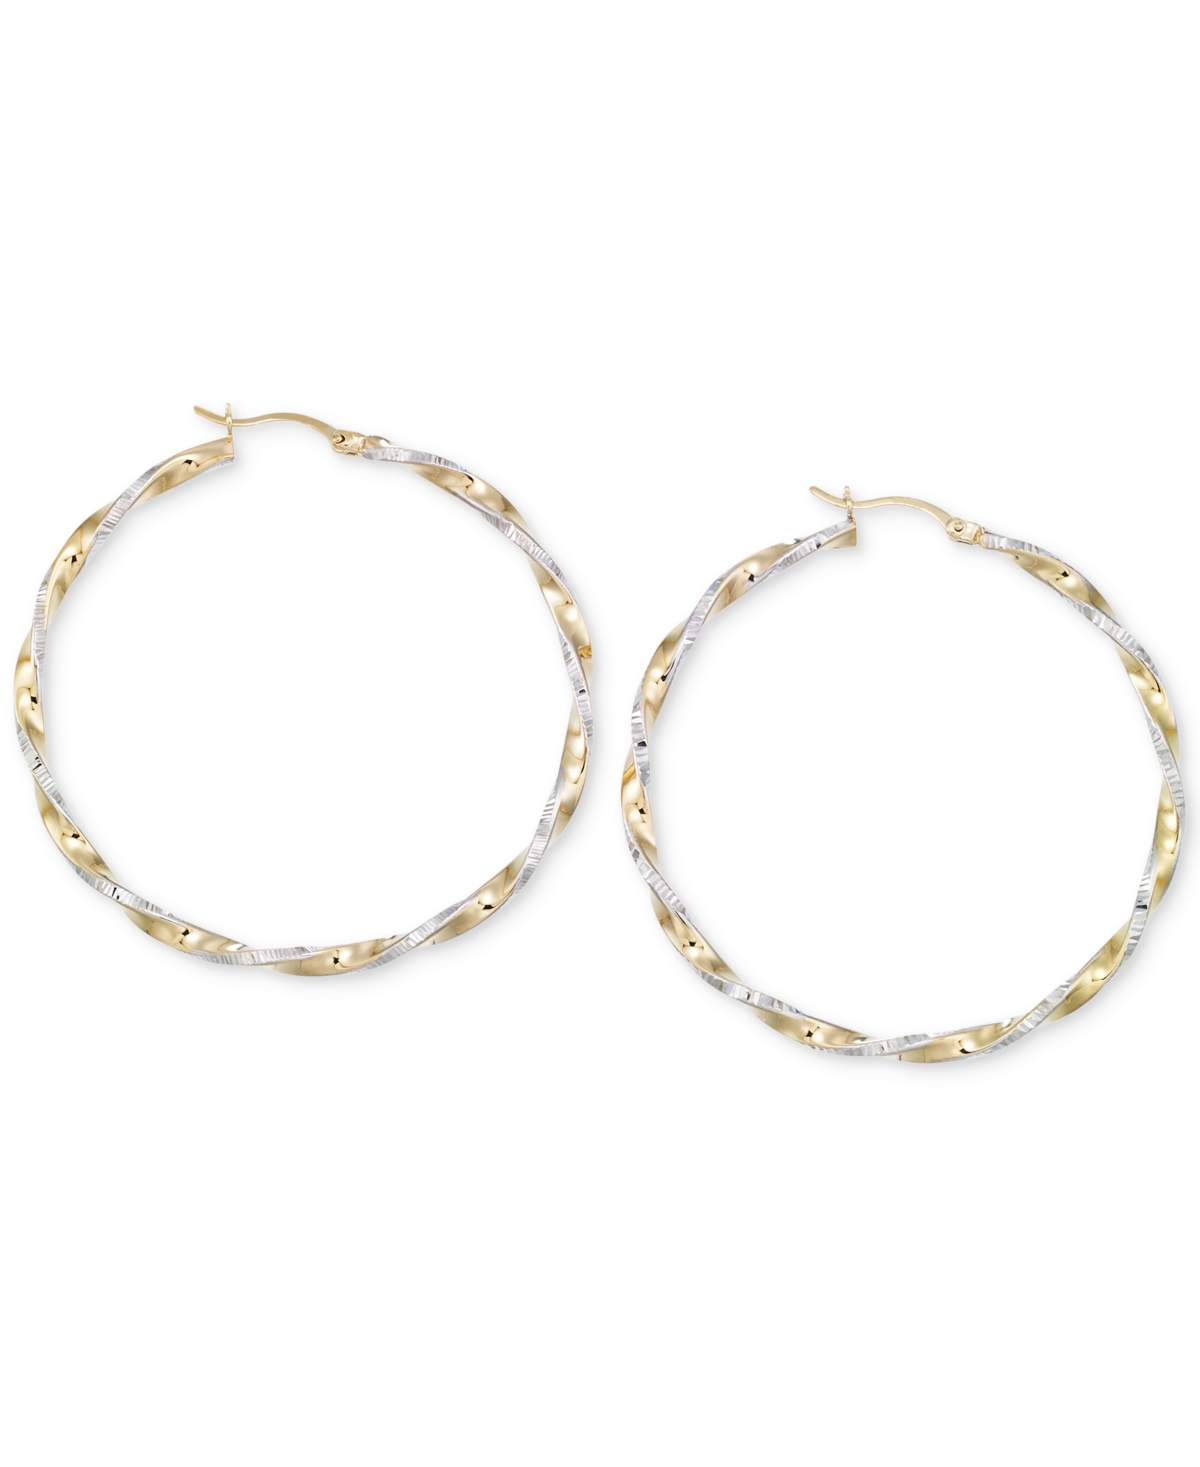 Details about   Real 14kt Yellow Gold & White Rhodium Twisted Hoop Earrings 